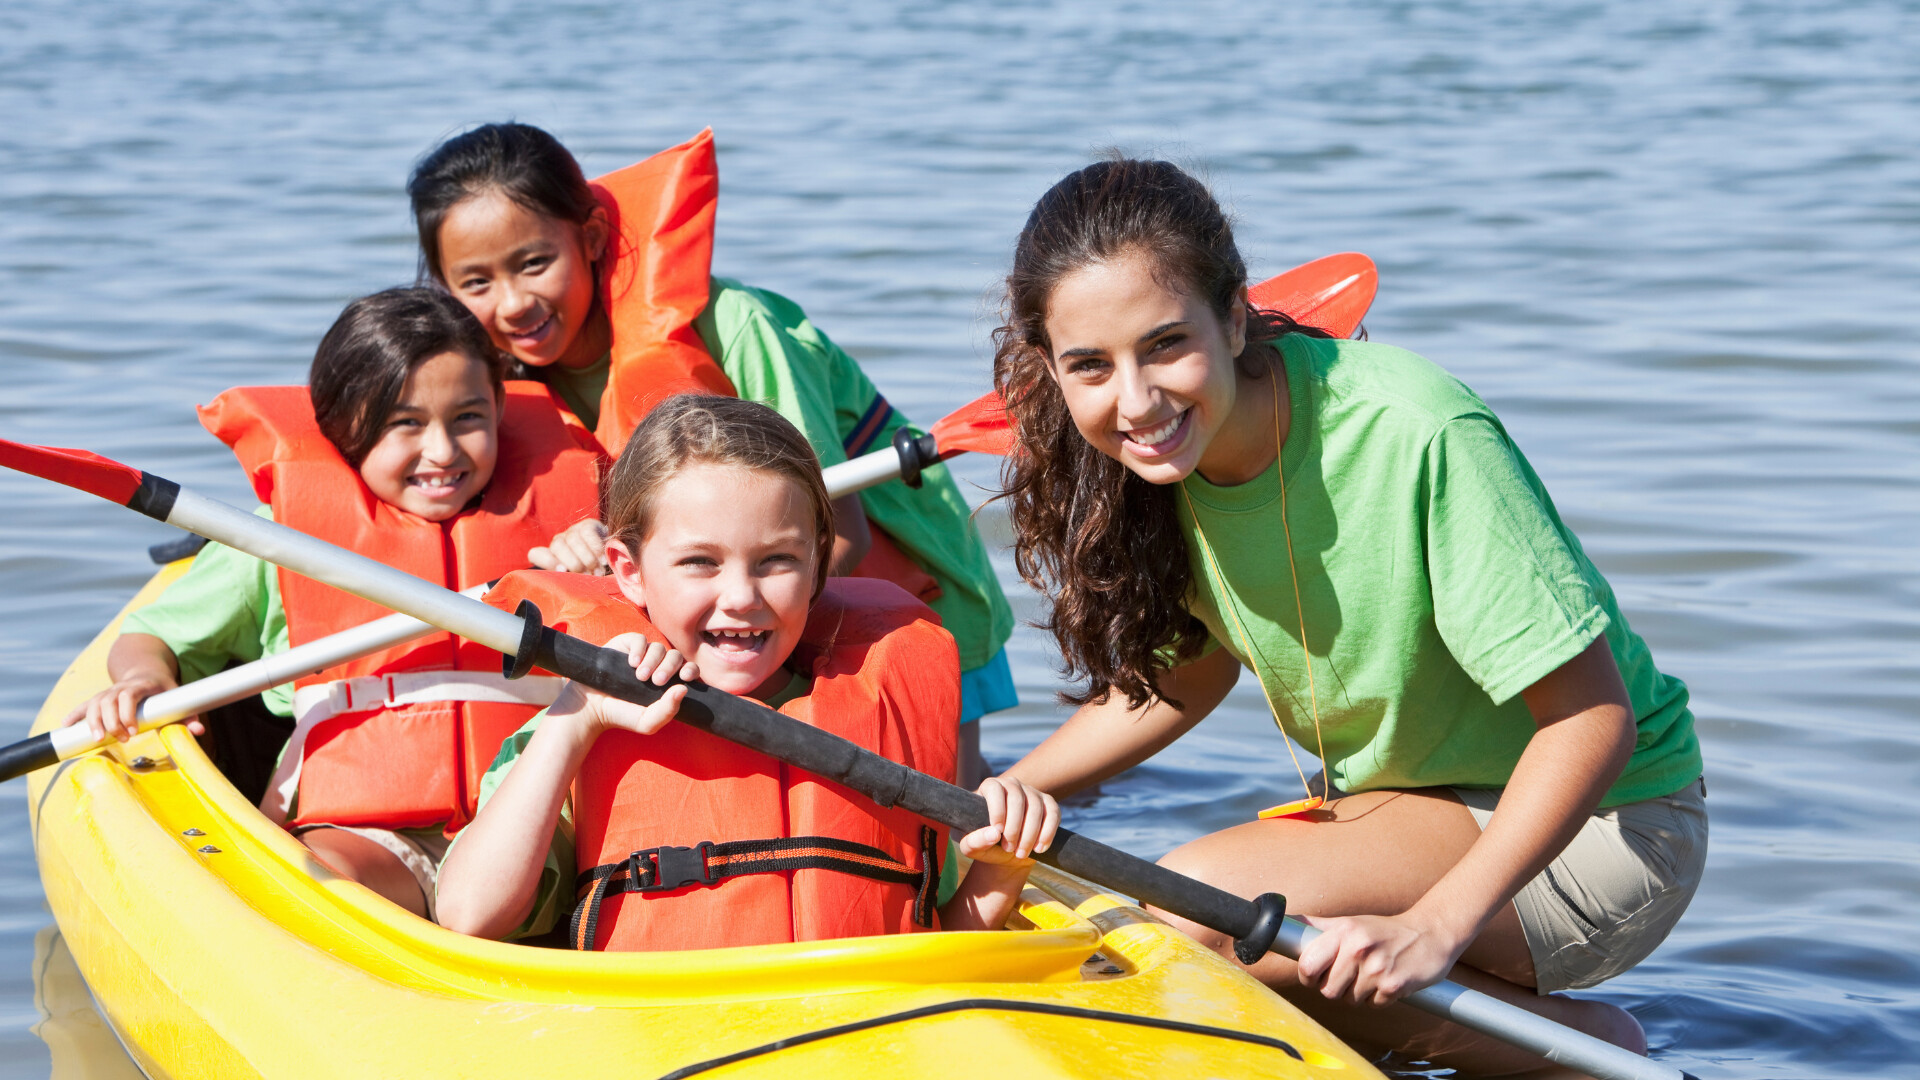 The Top 10 Risk Management Tips for Summer Camps